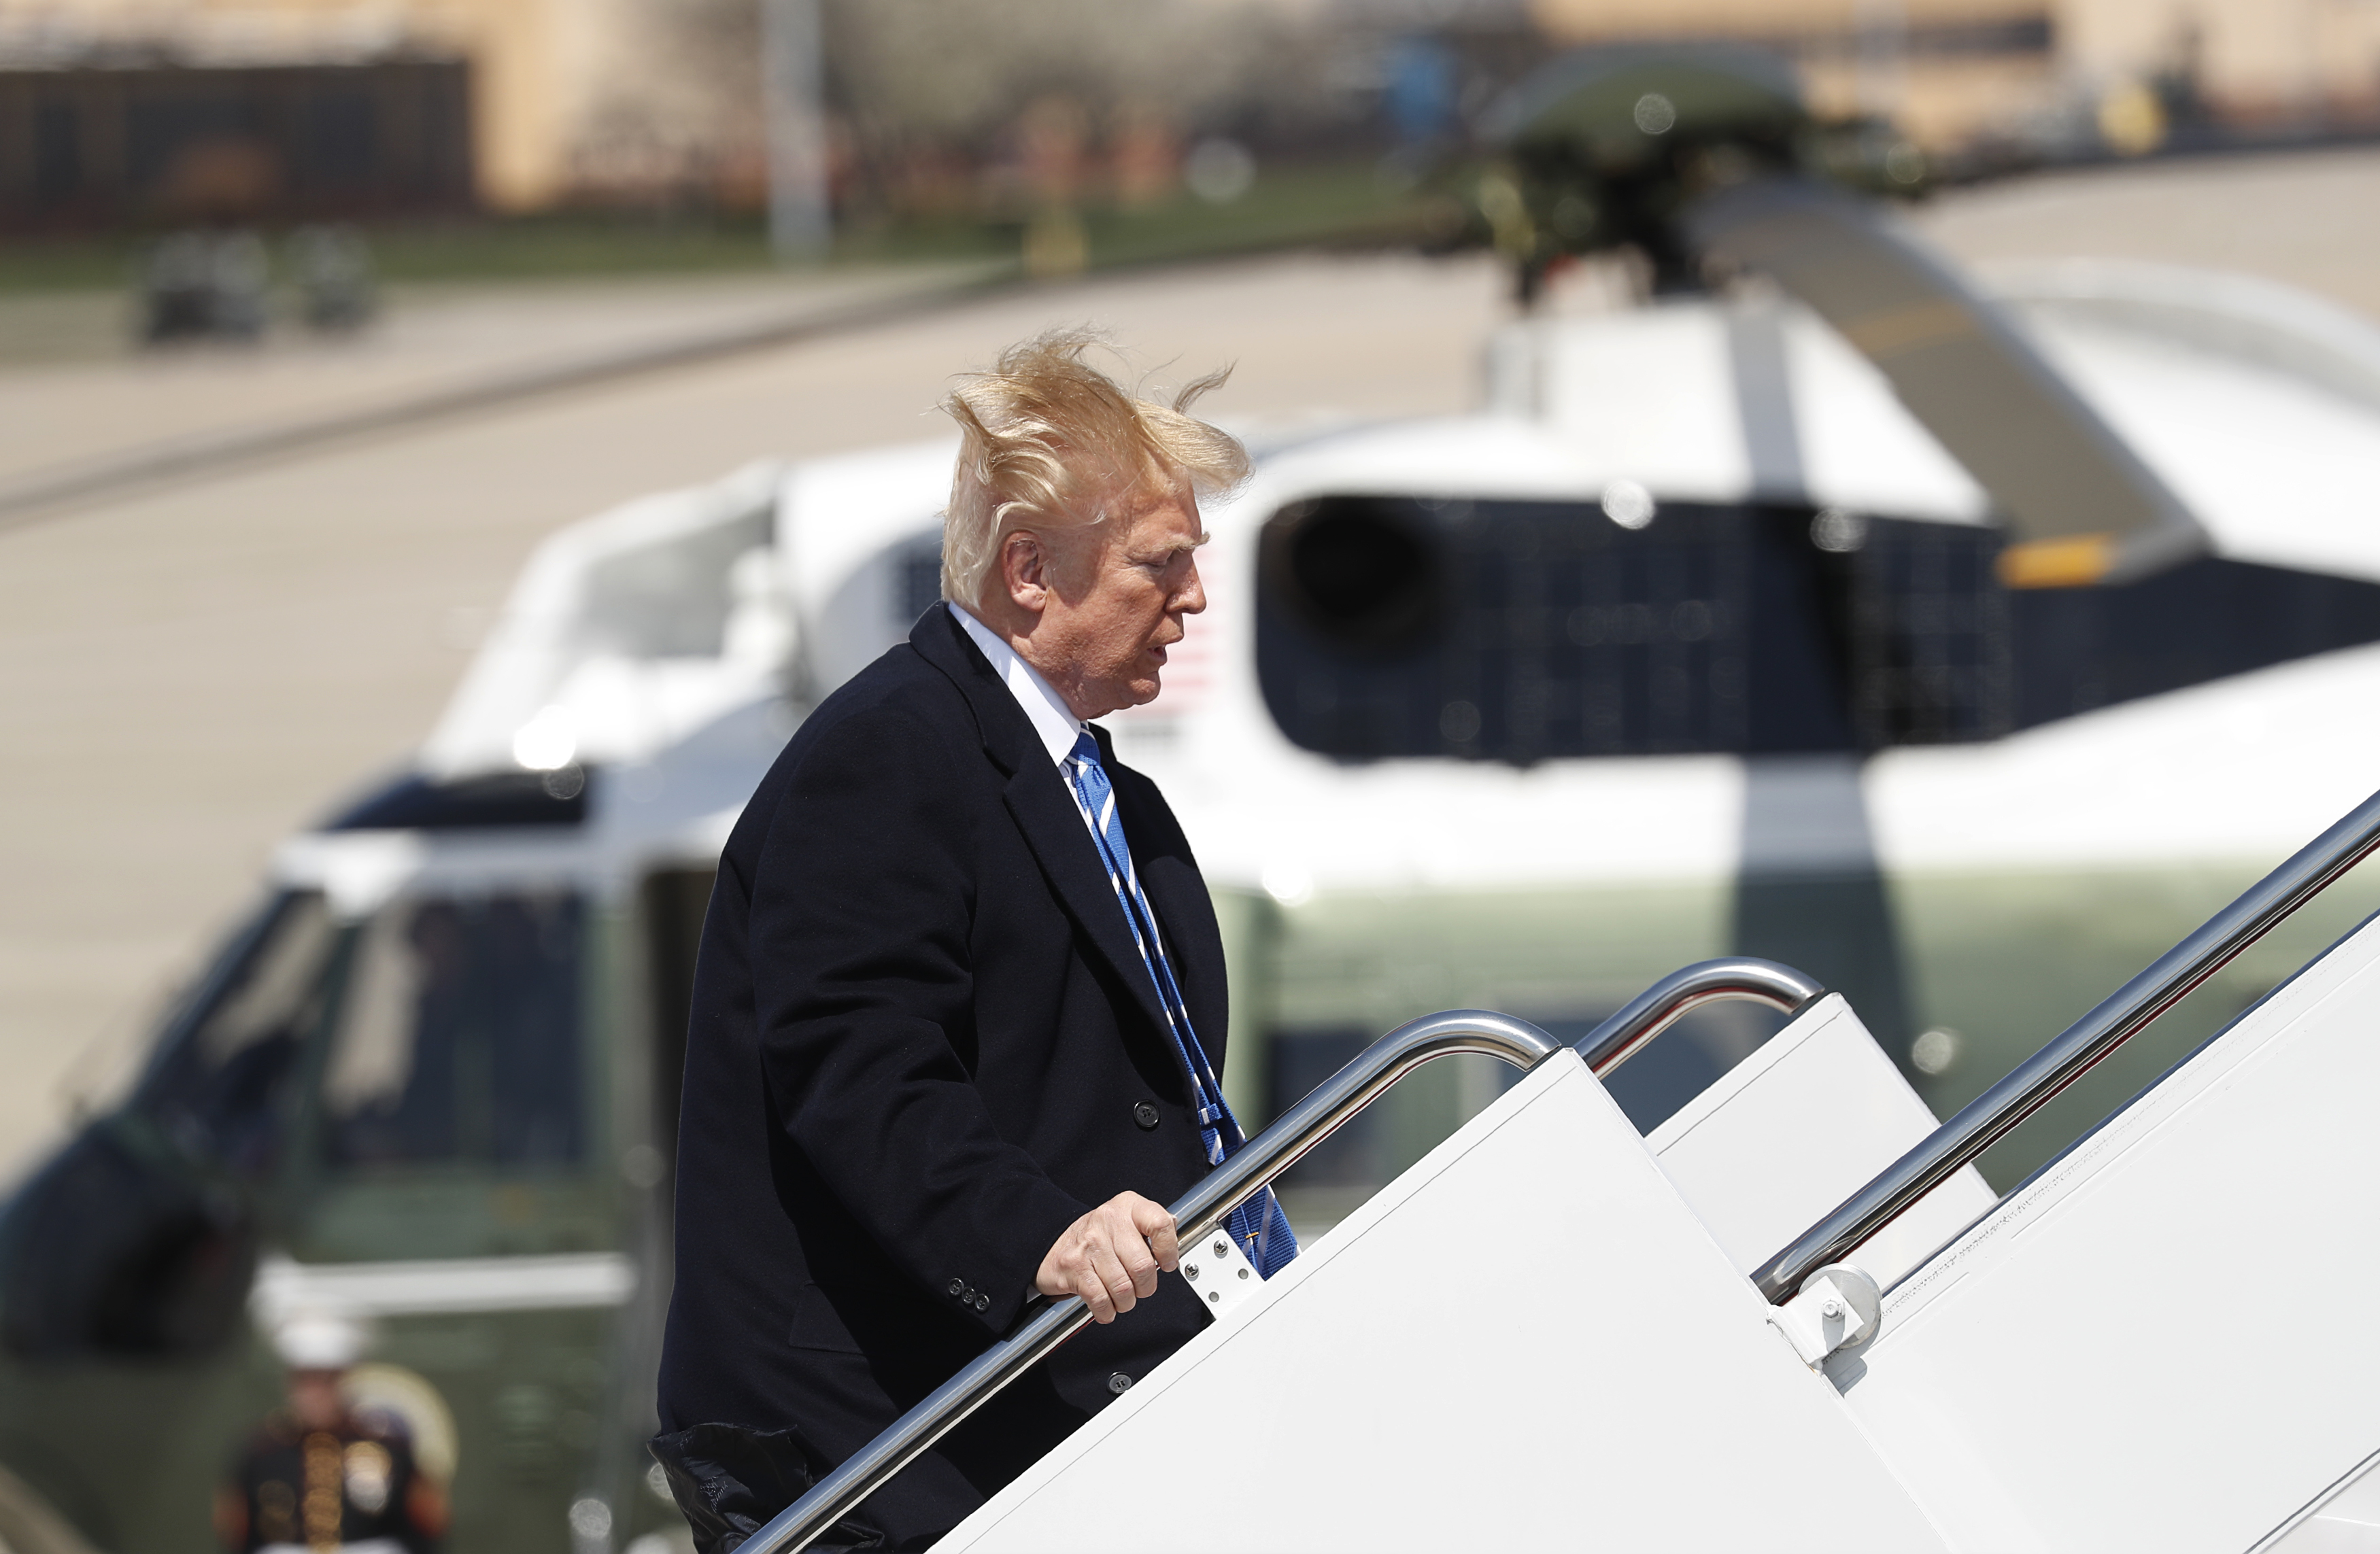 U.S. President Donald Trump yells over to members of the news media as he boards Air Force One on a windy day at Joint Base Andrews, Maryland before departing en route to an event in West Virginia, U.S., April 5, 2018. (REUTERS/Kevin Lamarque)